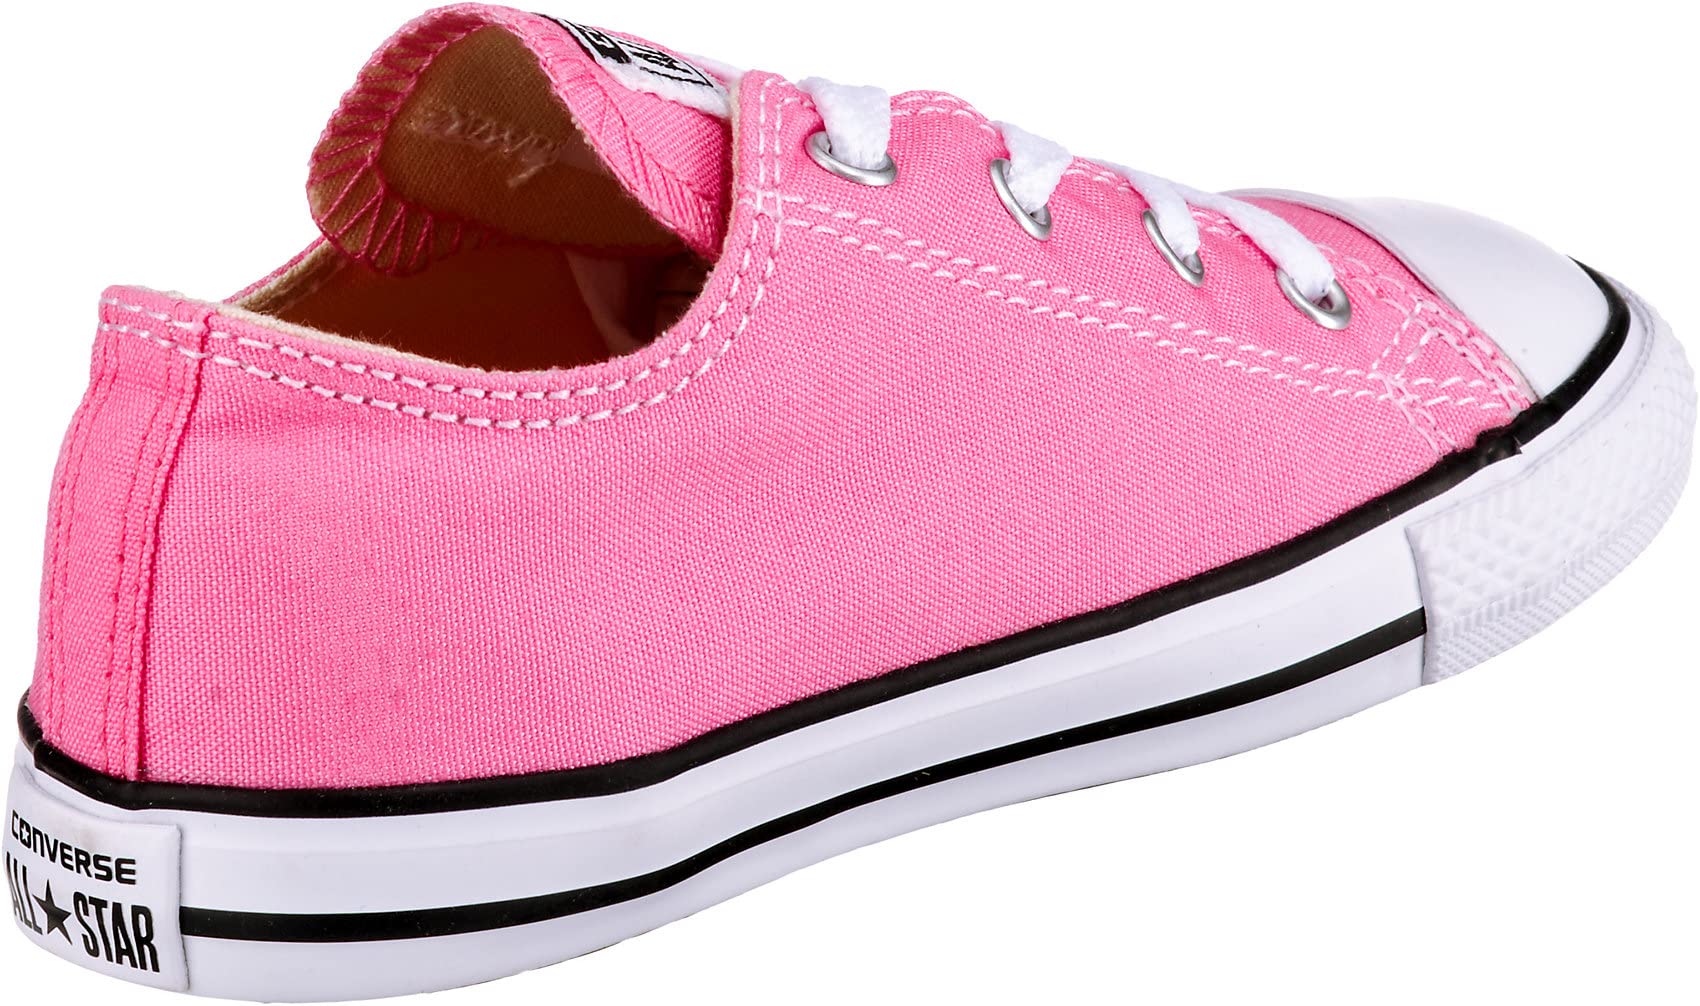 Converse Girls' Infant/Toddler Chuck Taylor All Star Ox - Pink - 9 TOD